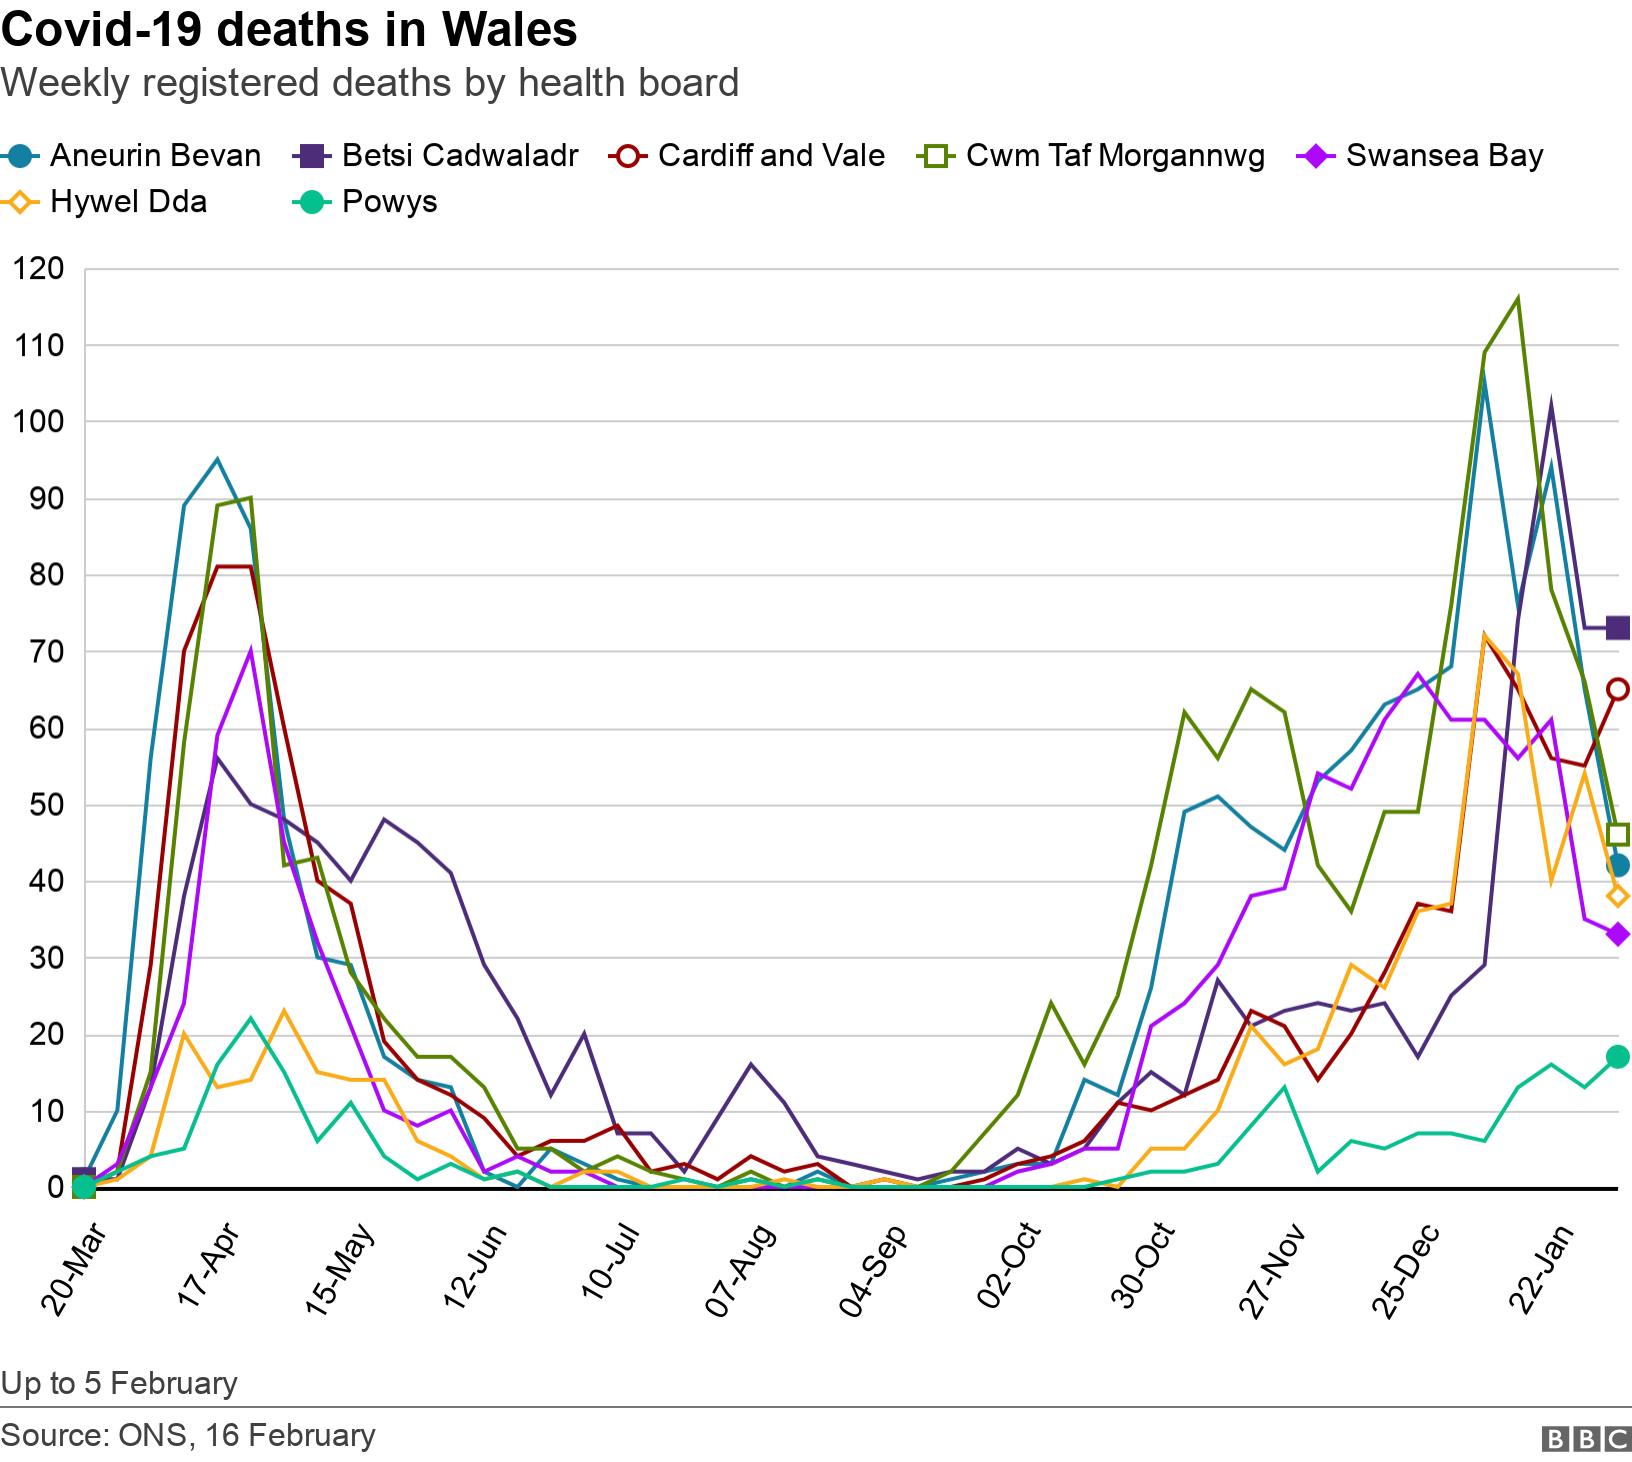 Covid-19 deaths in Wales. Weekly registered deaths by health board.  Up to 5 February.